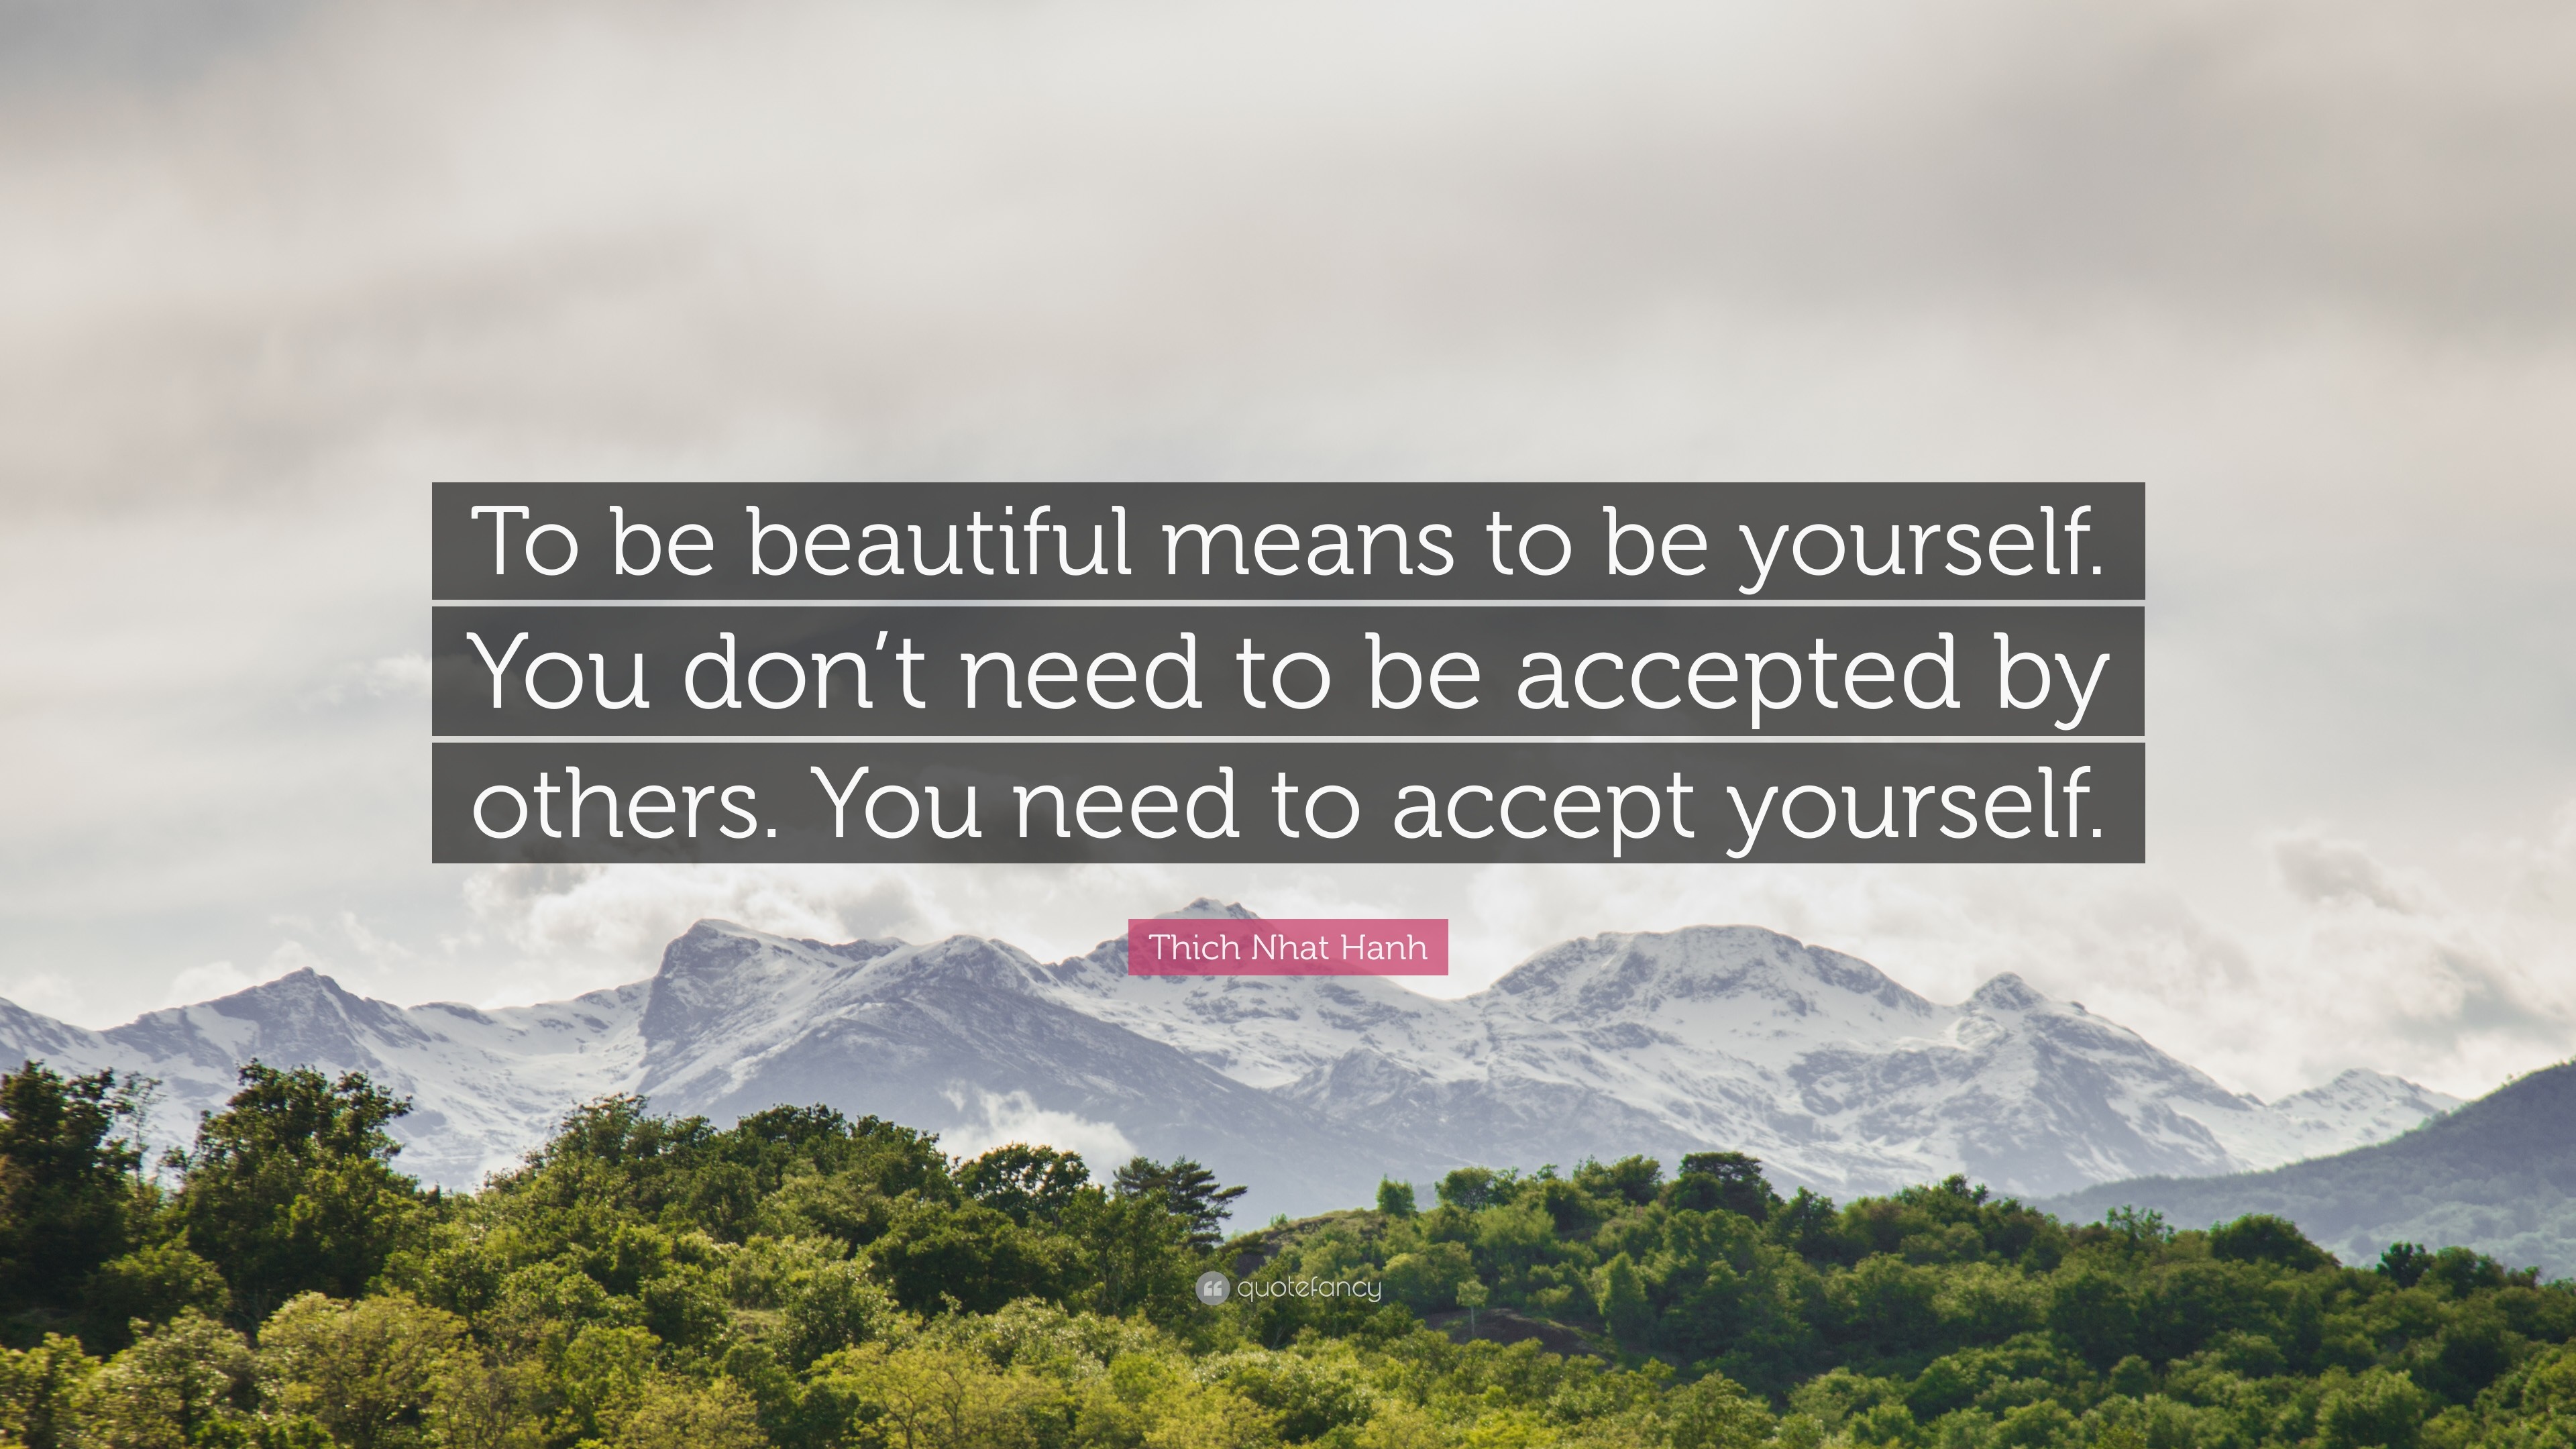 3840x2160 Beauty Quotes: “To be beautiful means to be yourself. You don't